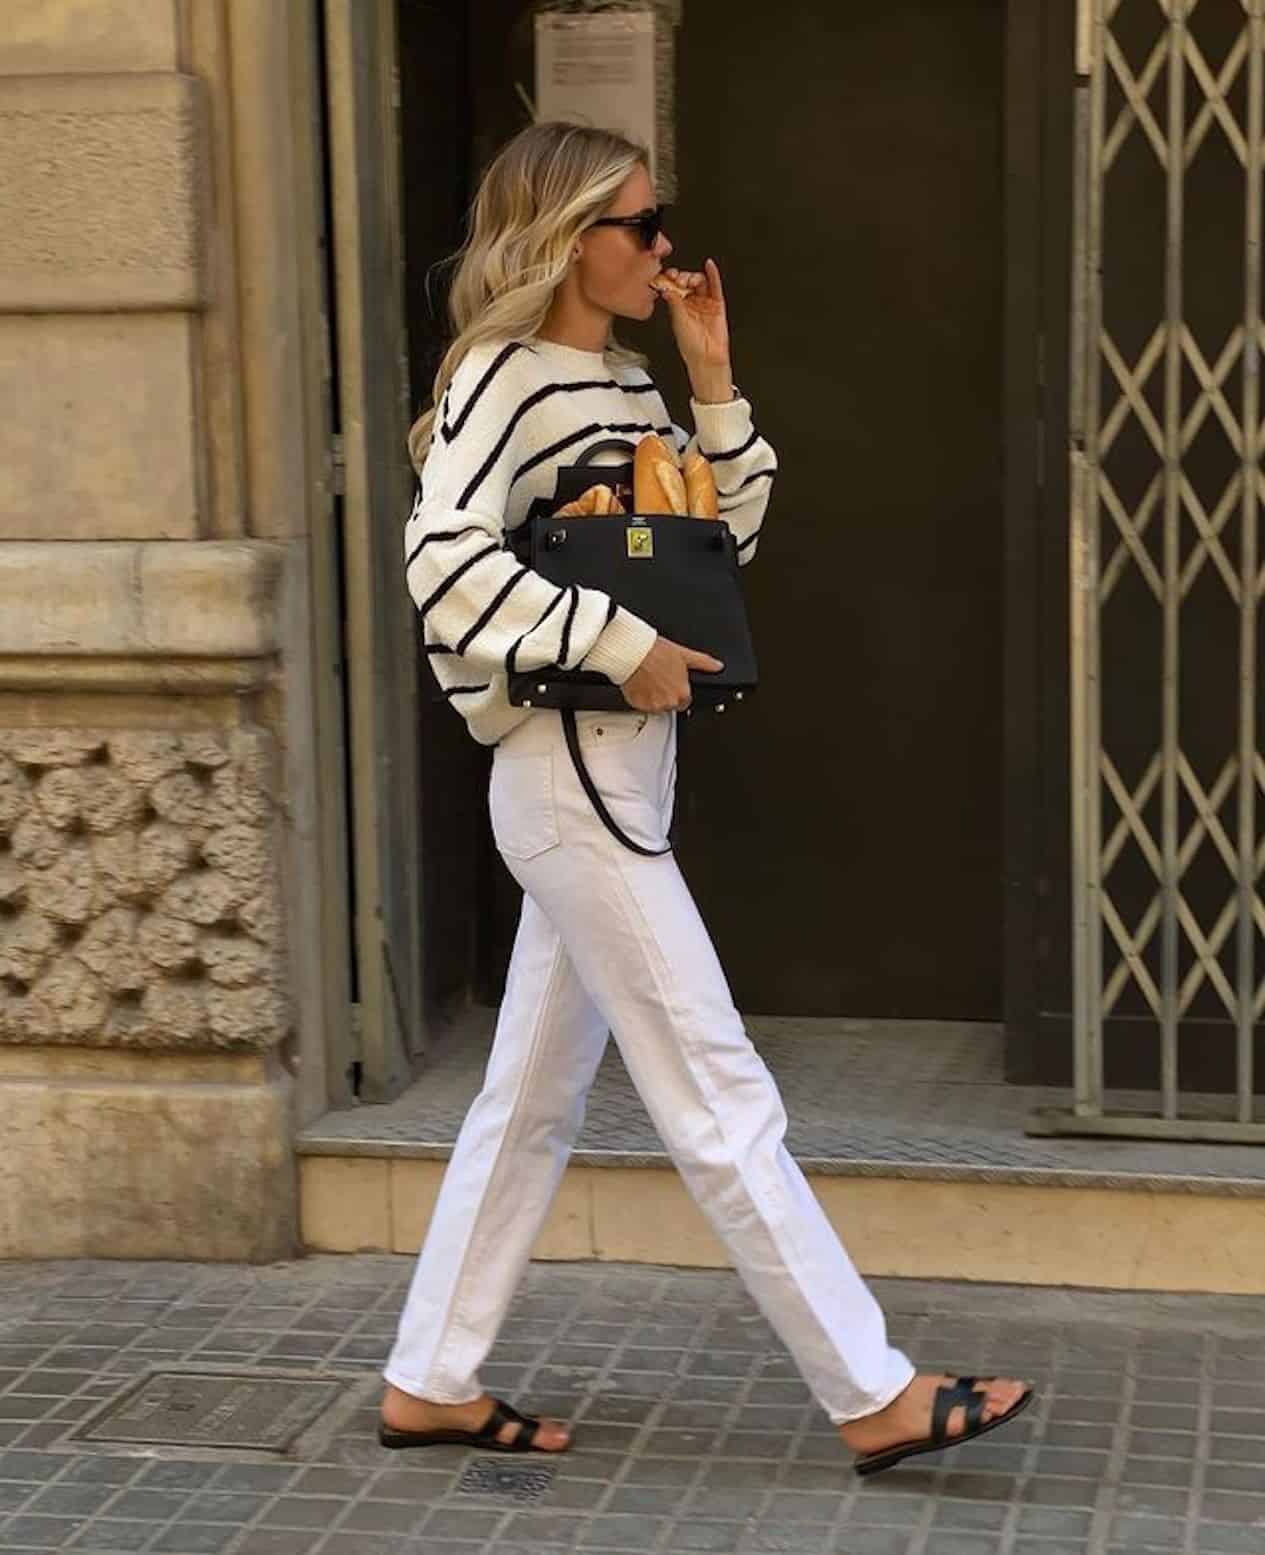 Woman wearing white jeans, black sandals and a black and white striped sweater walks through the city eating bread.